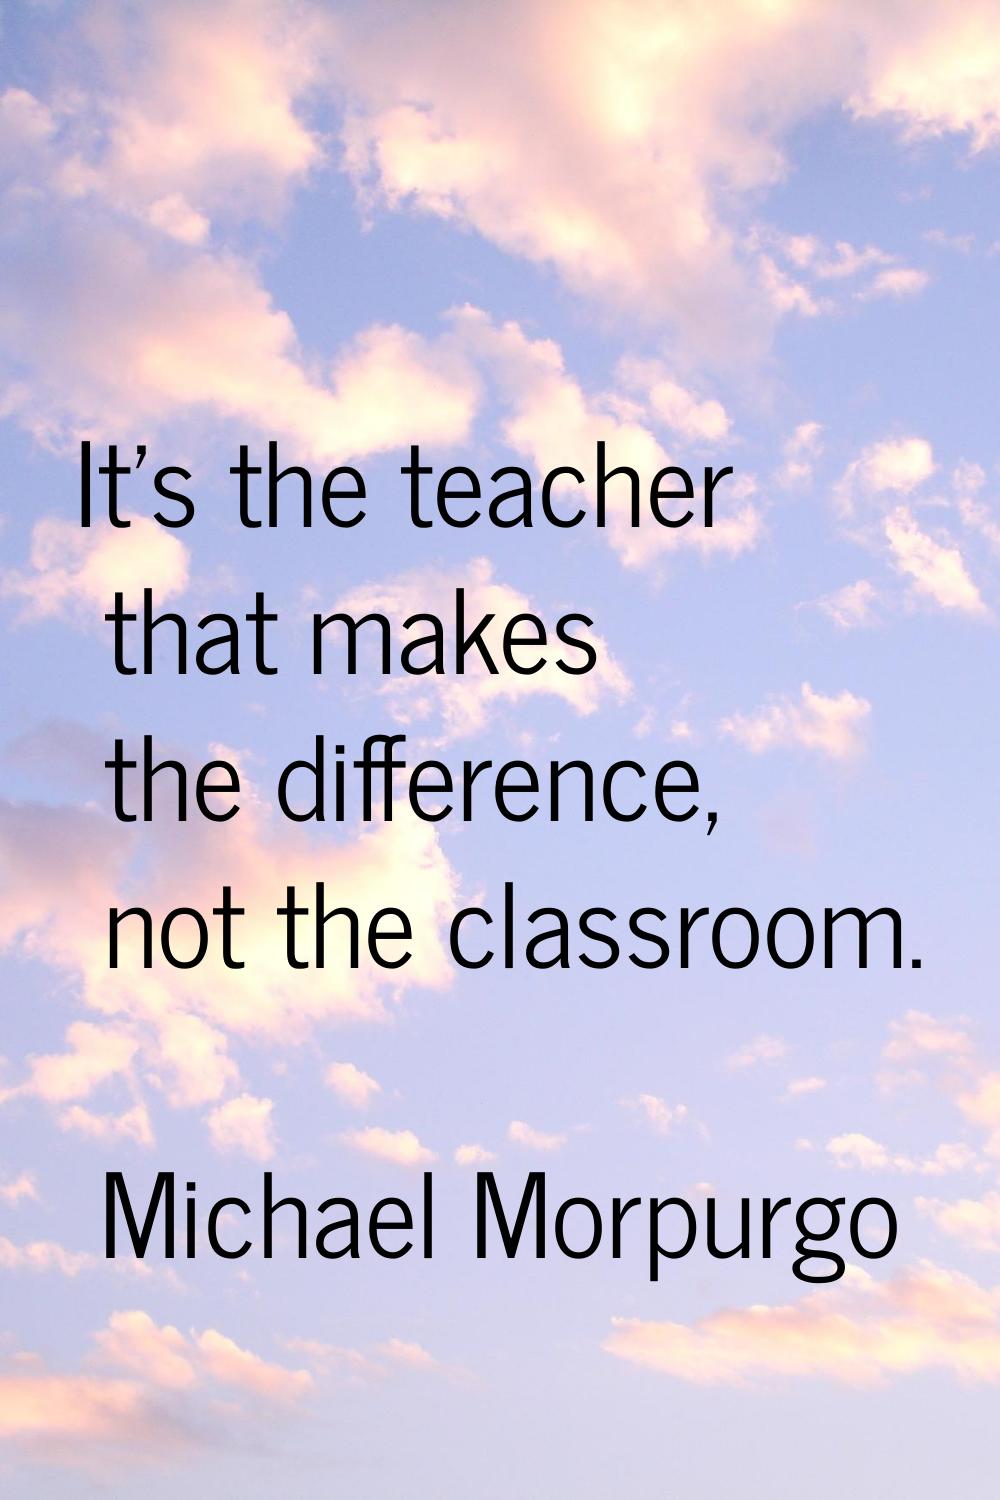 It's the teacher that makes the difference, not the classroom.